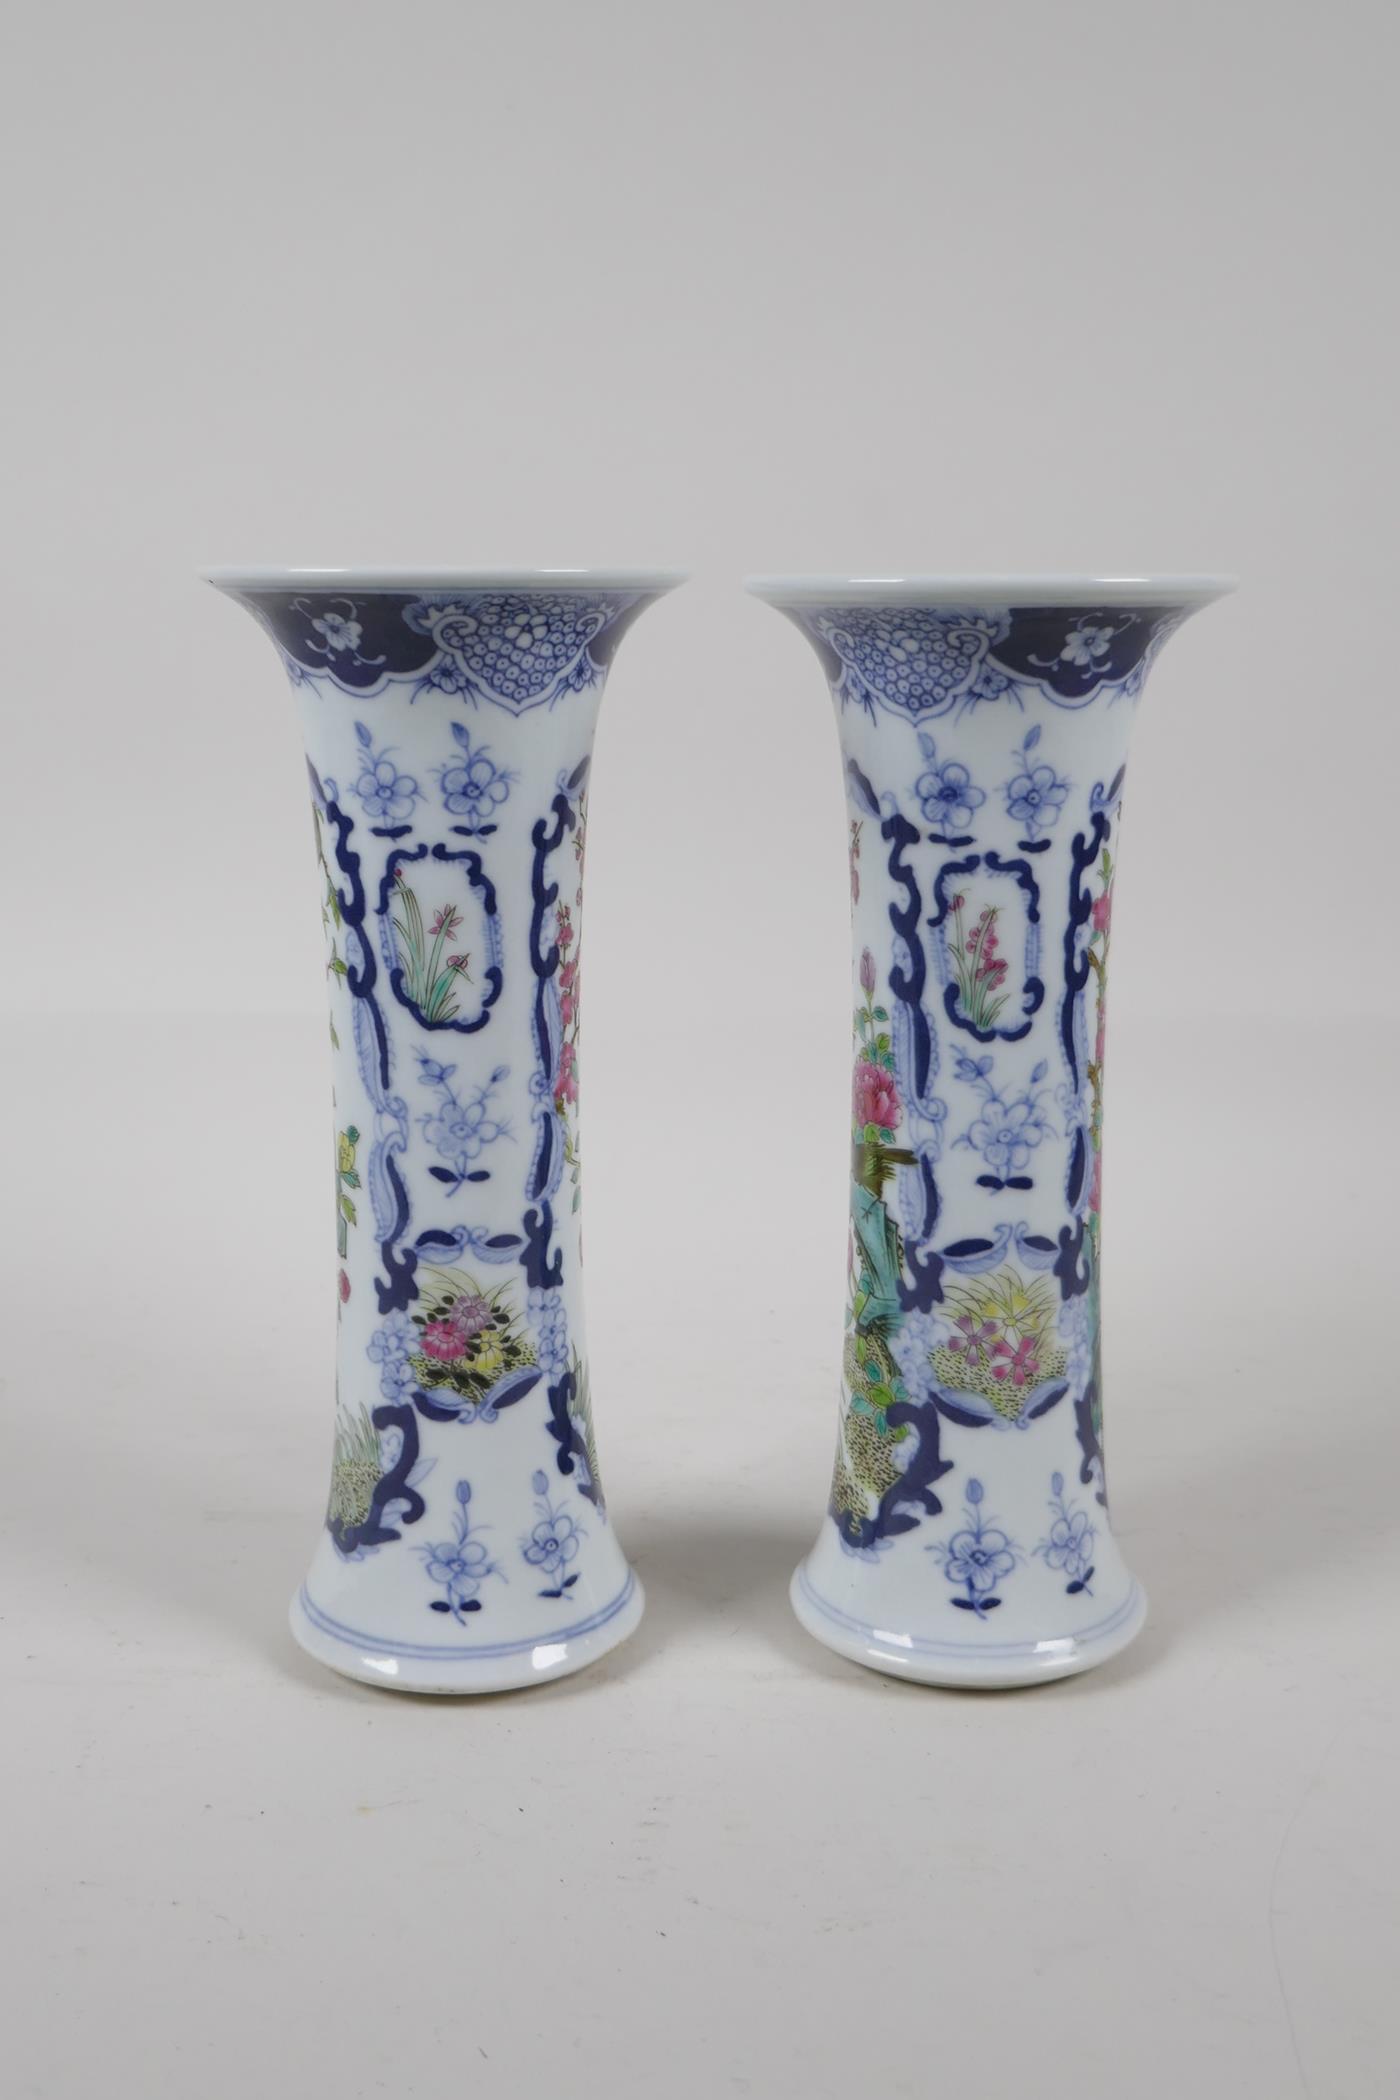 A pair of early C20th Chinese blue and white porcelain stem vases with decorative famille verte - Image 2 of 6